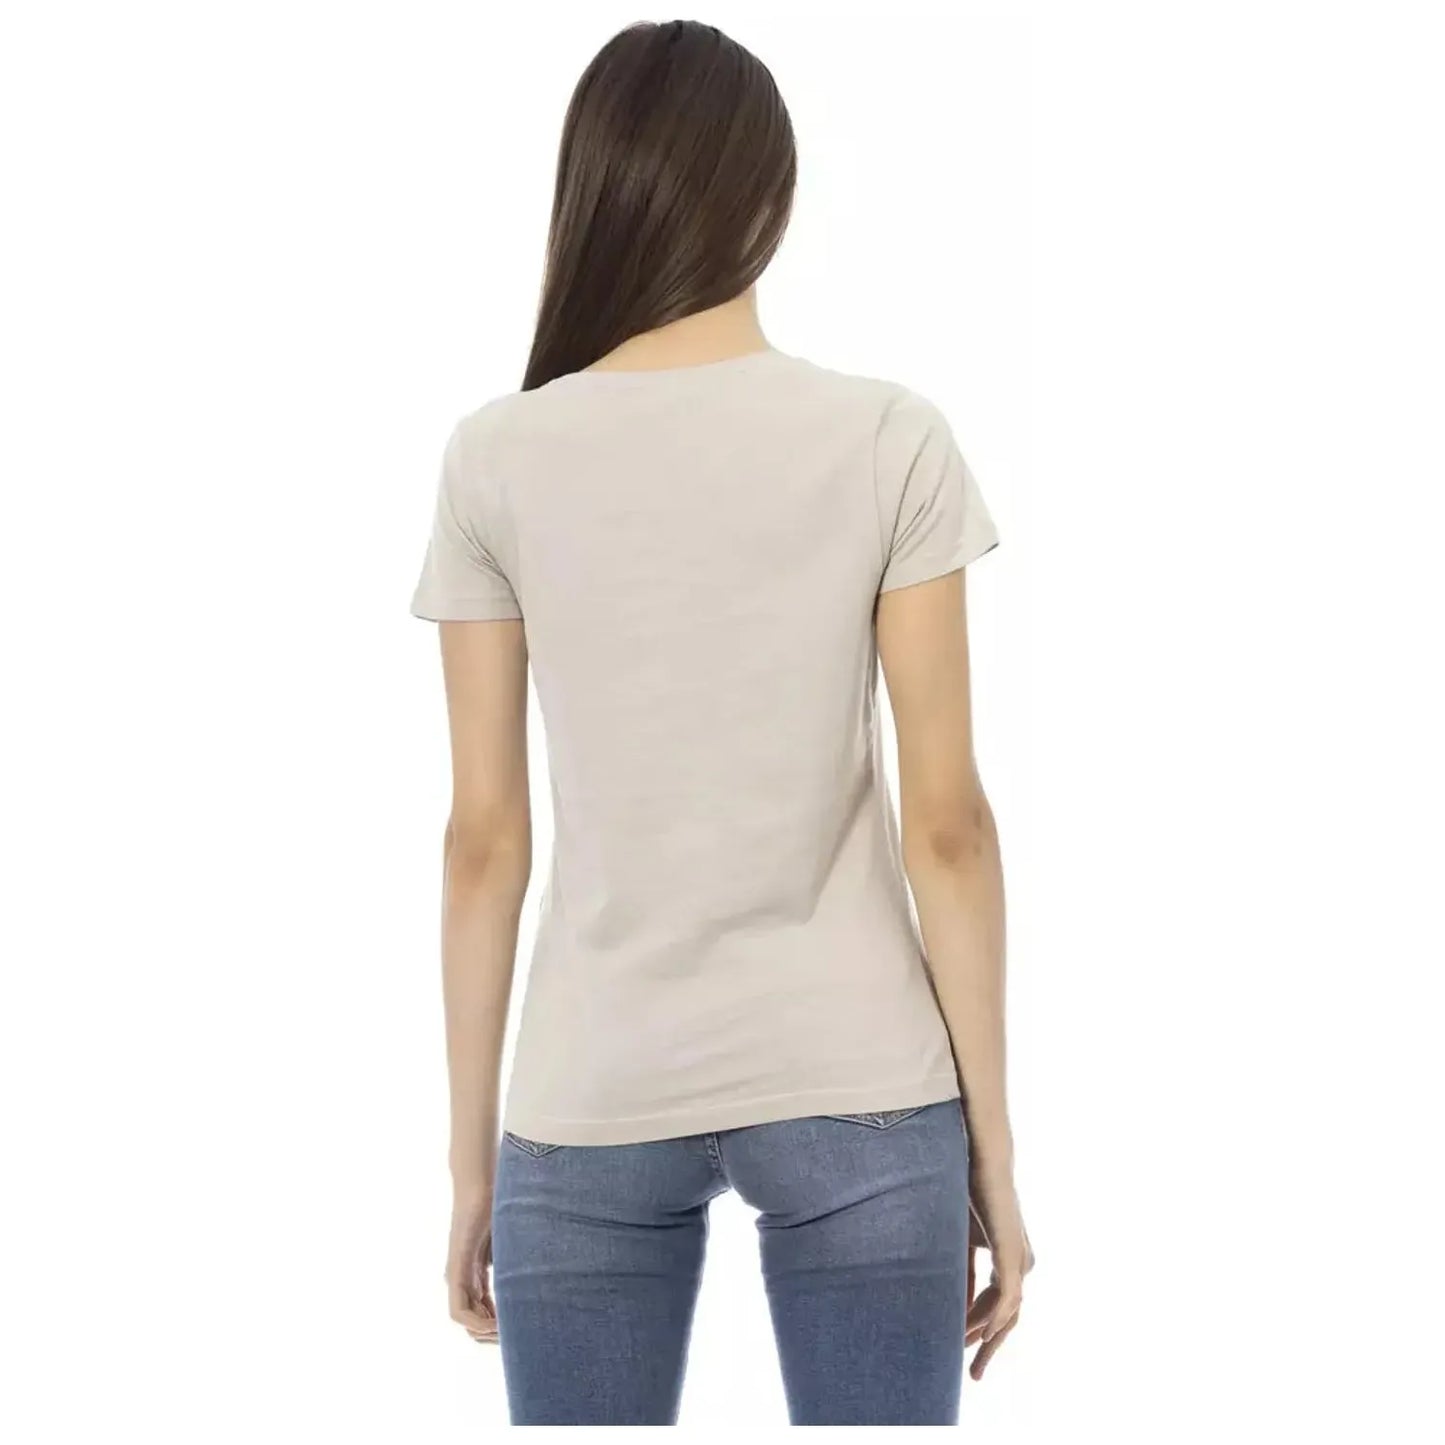 Trussardi Action Elegant Beige Printed Tee for the Stylish Woman beige-cotton-tops-t-shirt-14